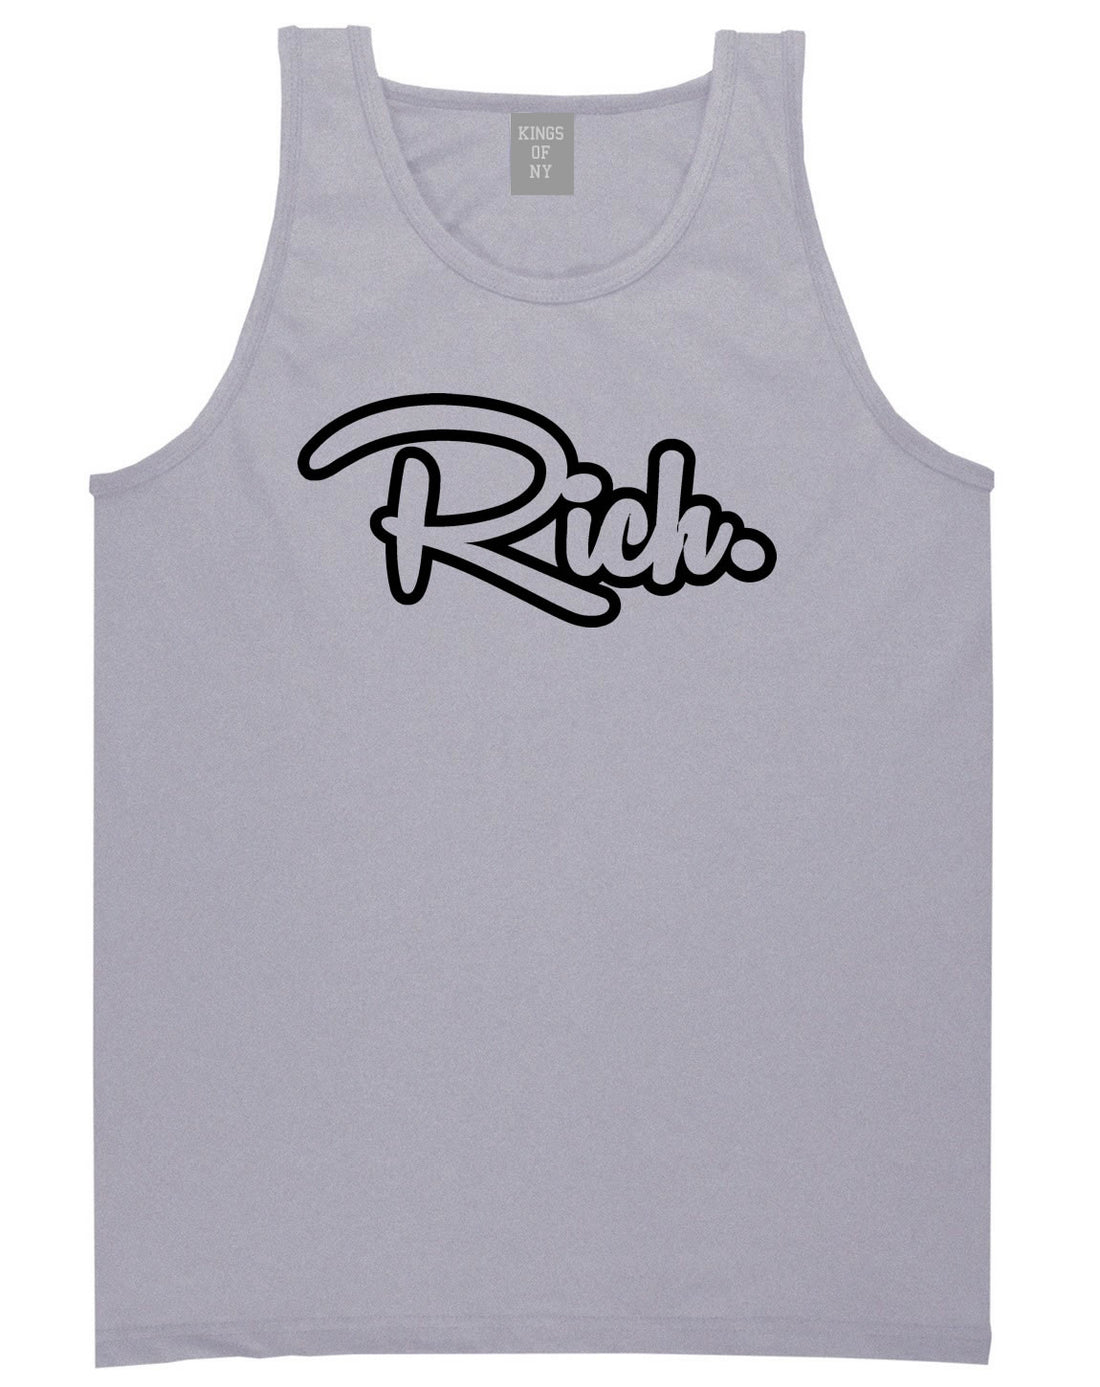 Rich Money Fab Style New York Richie NYC Tank Top In Grey by Kings Of NY